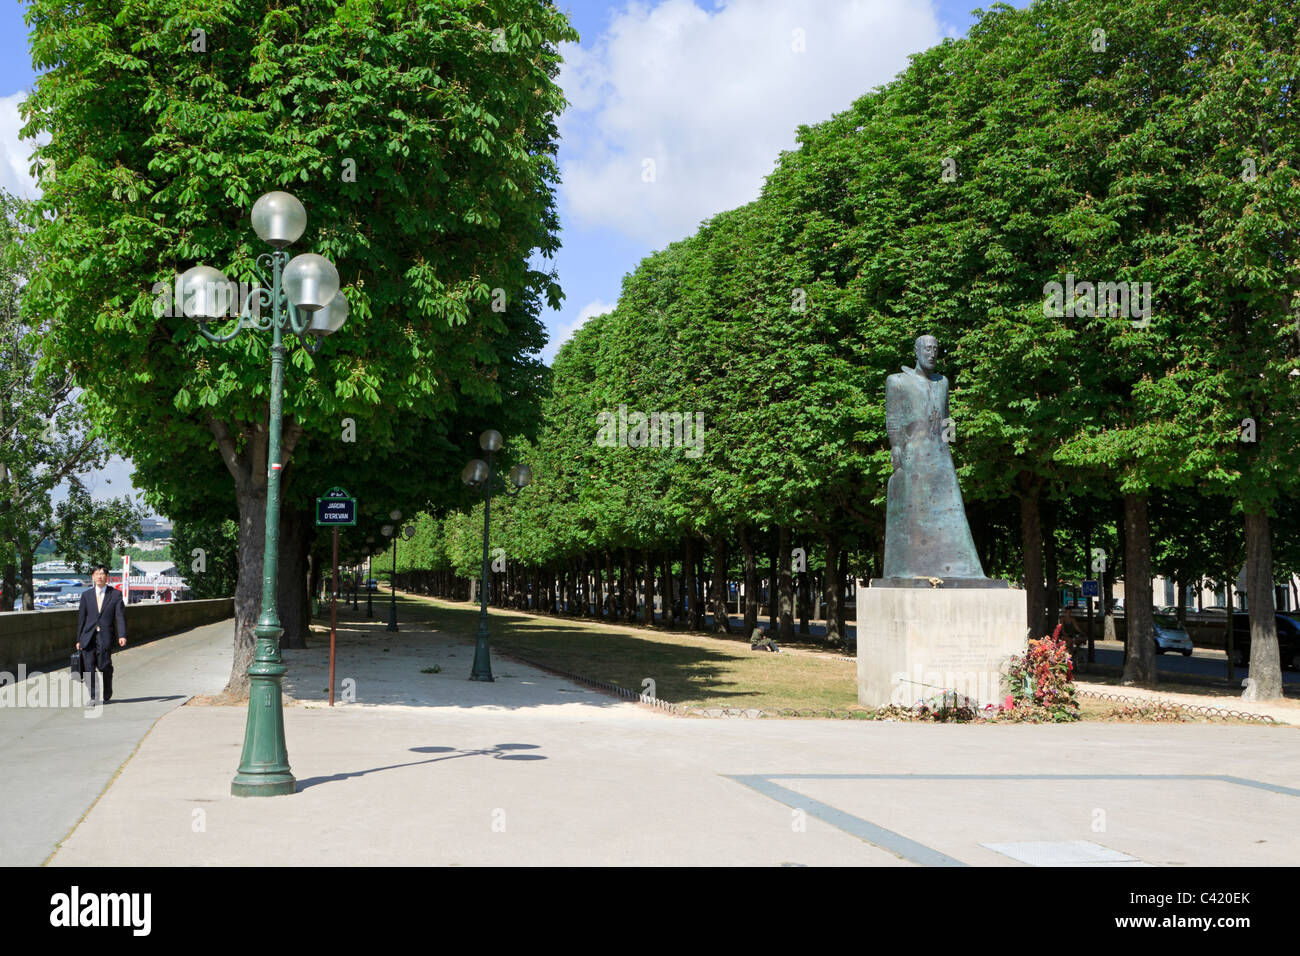 Jardin D'Erevan, Paris. The statue is a memorial to Father Komitas and victims of Armenian genocide in the Ottoman Empire. Stock Photo